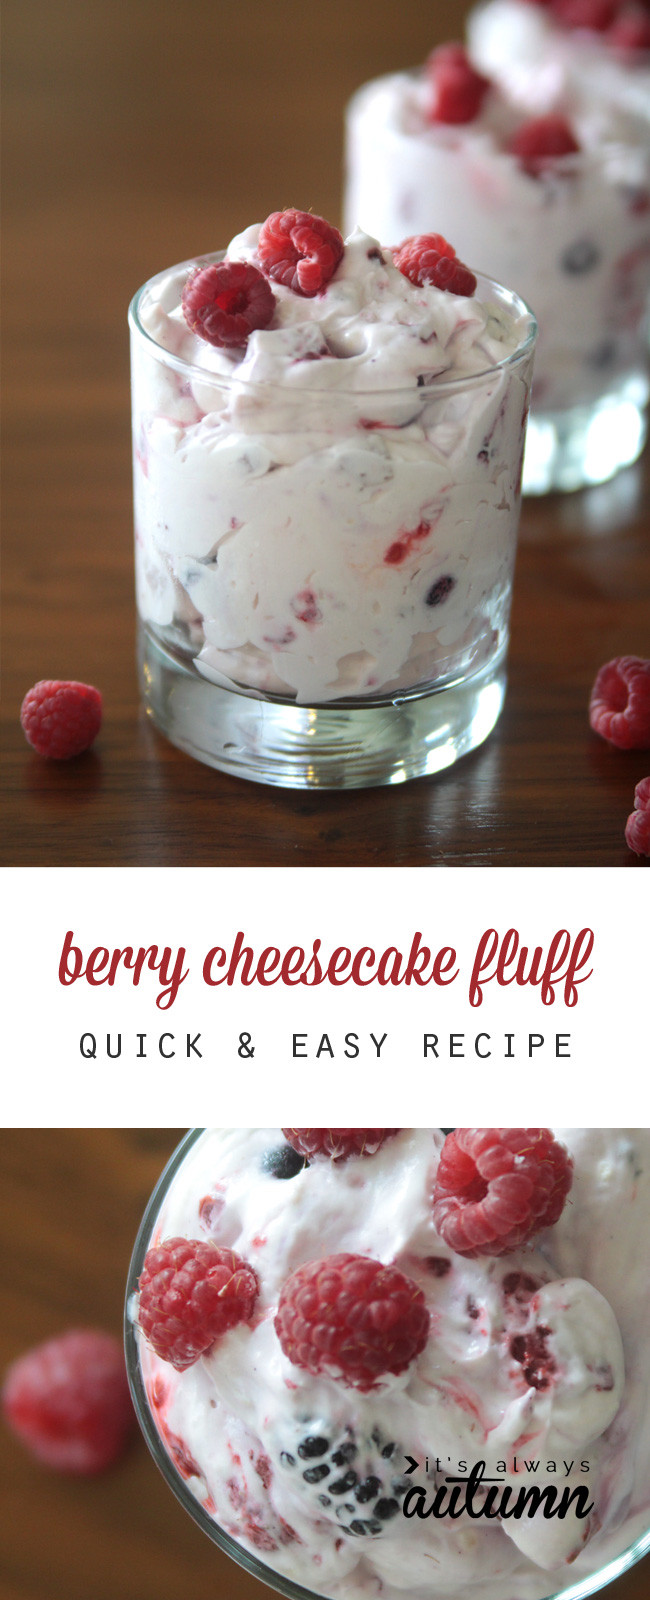 Quick And Healthy Desserts
 berry cheesecake fluff a lighter holiday dessert It s